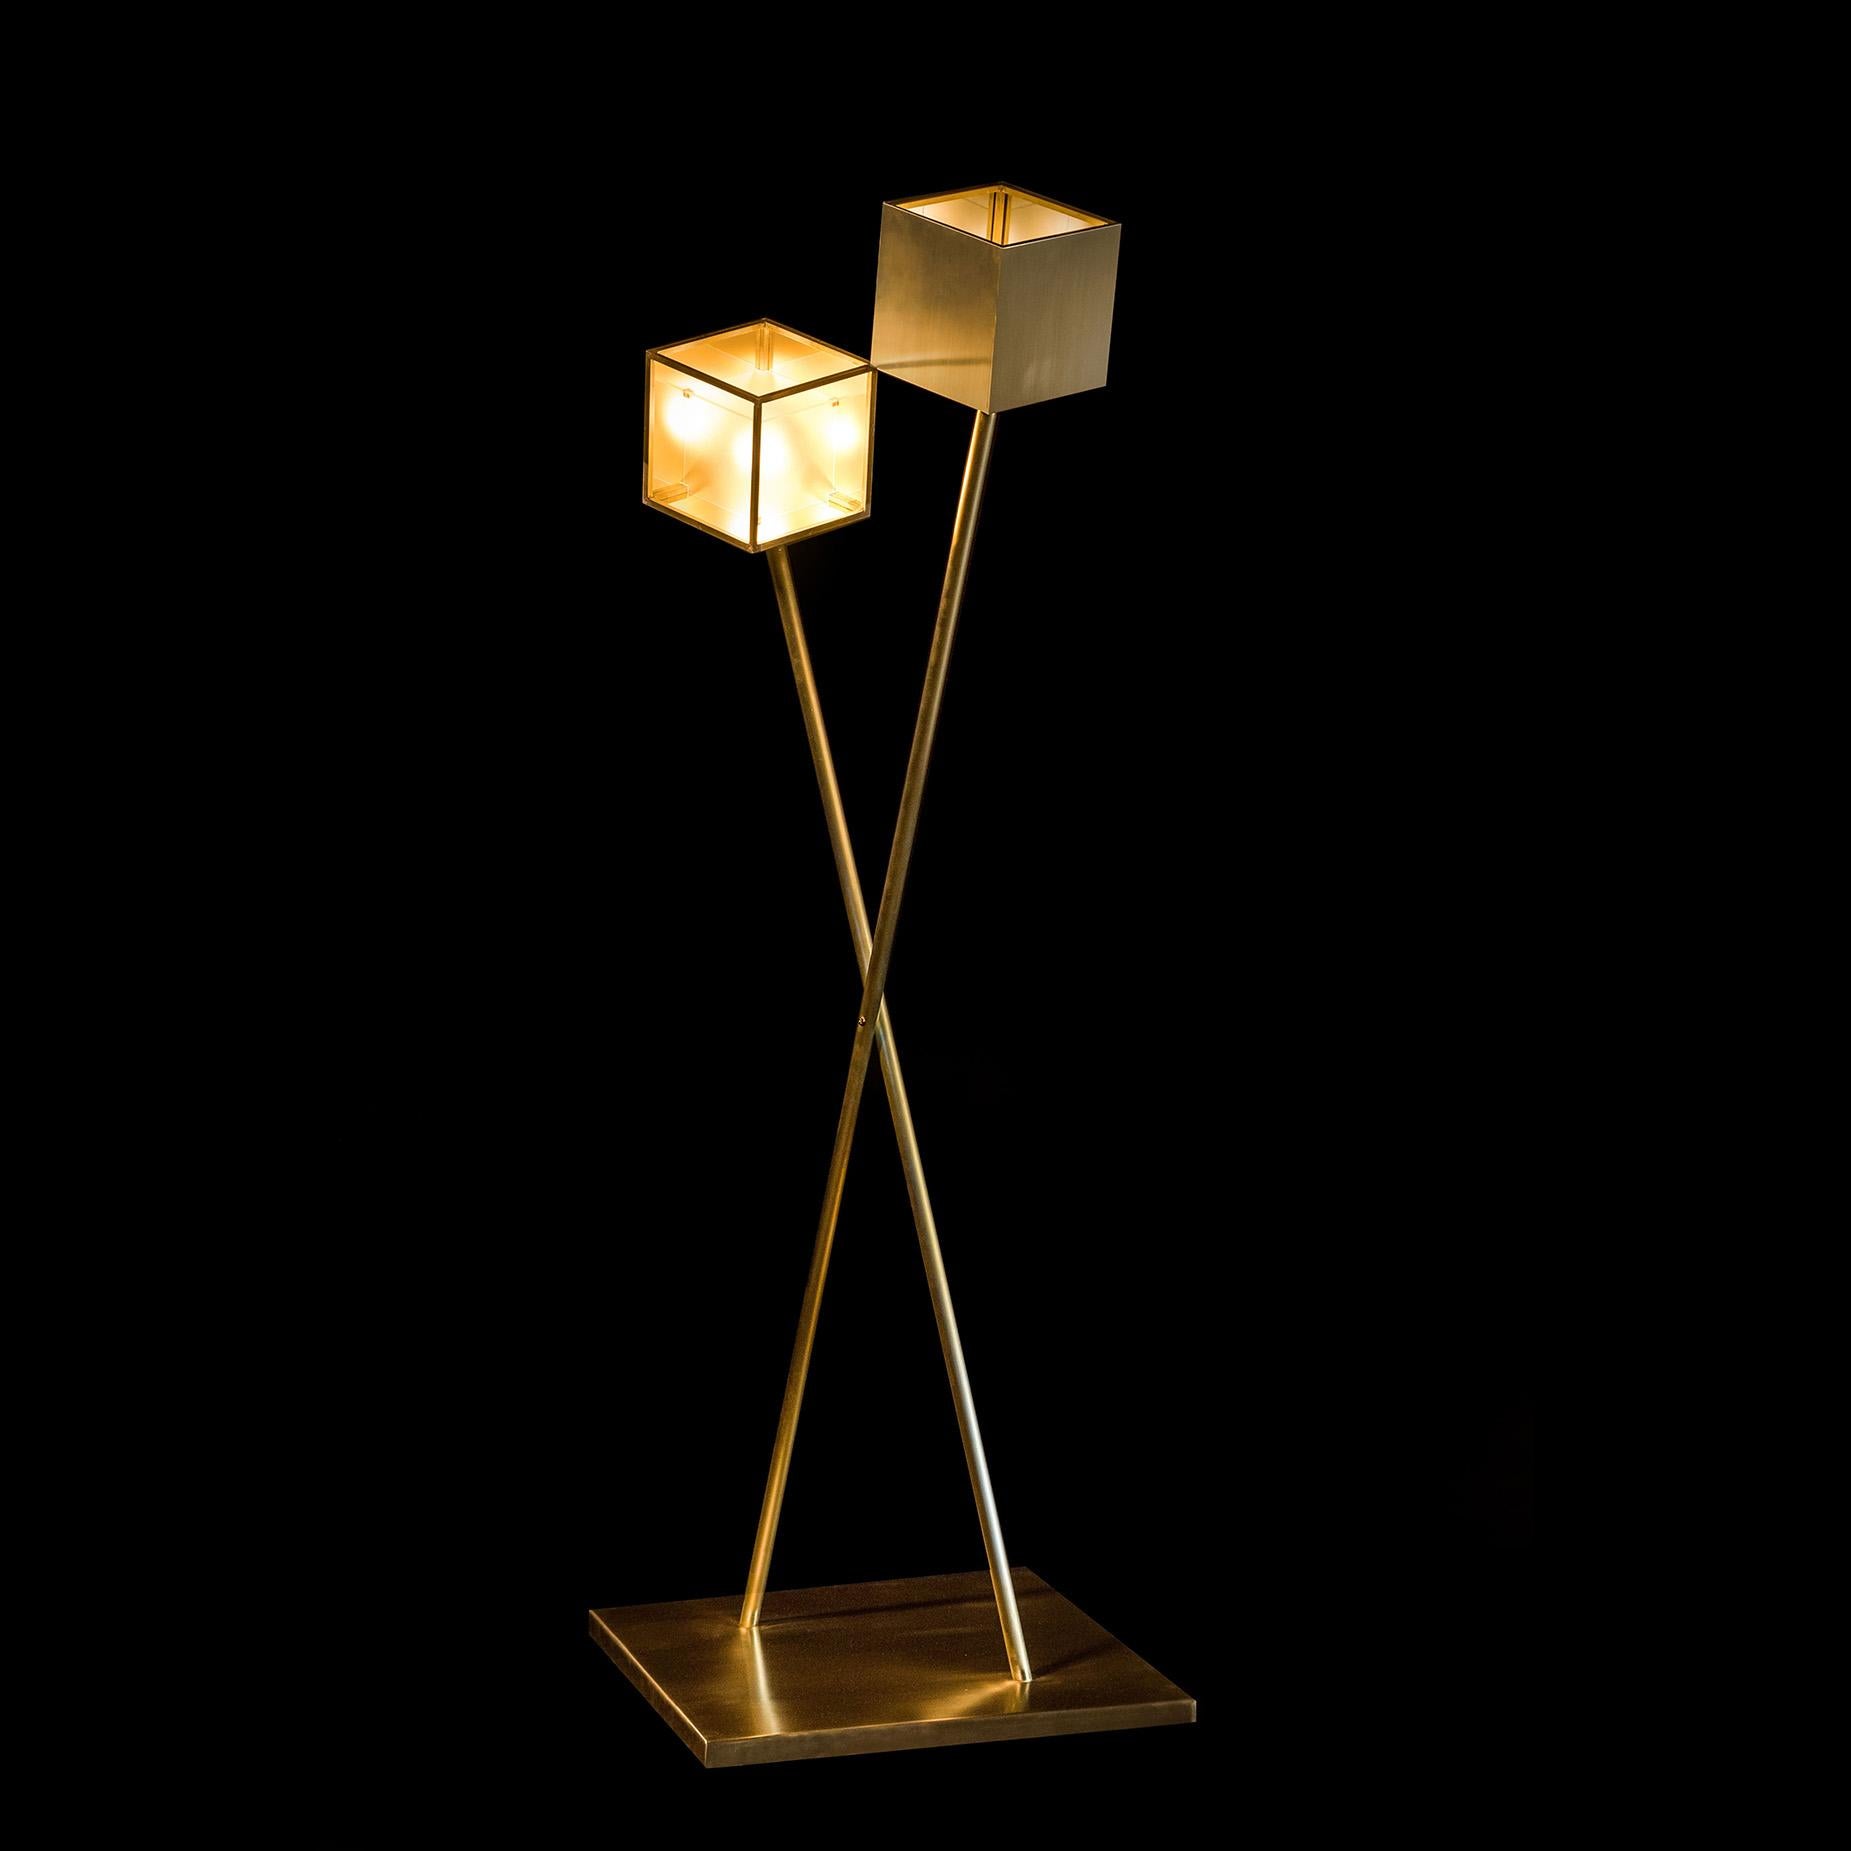 Polished Flis Sculptural Floor Lamp Brass by Diaphan Studio, REP by Tuleste Factory For Sale